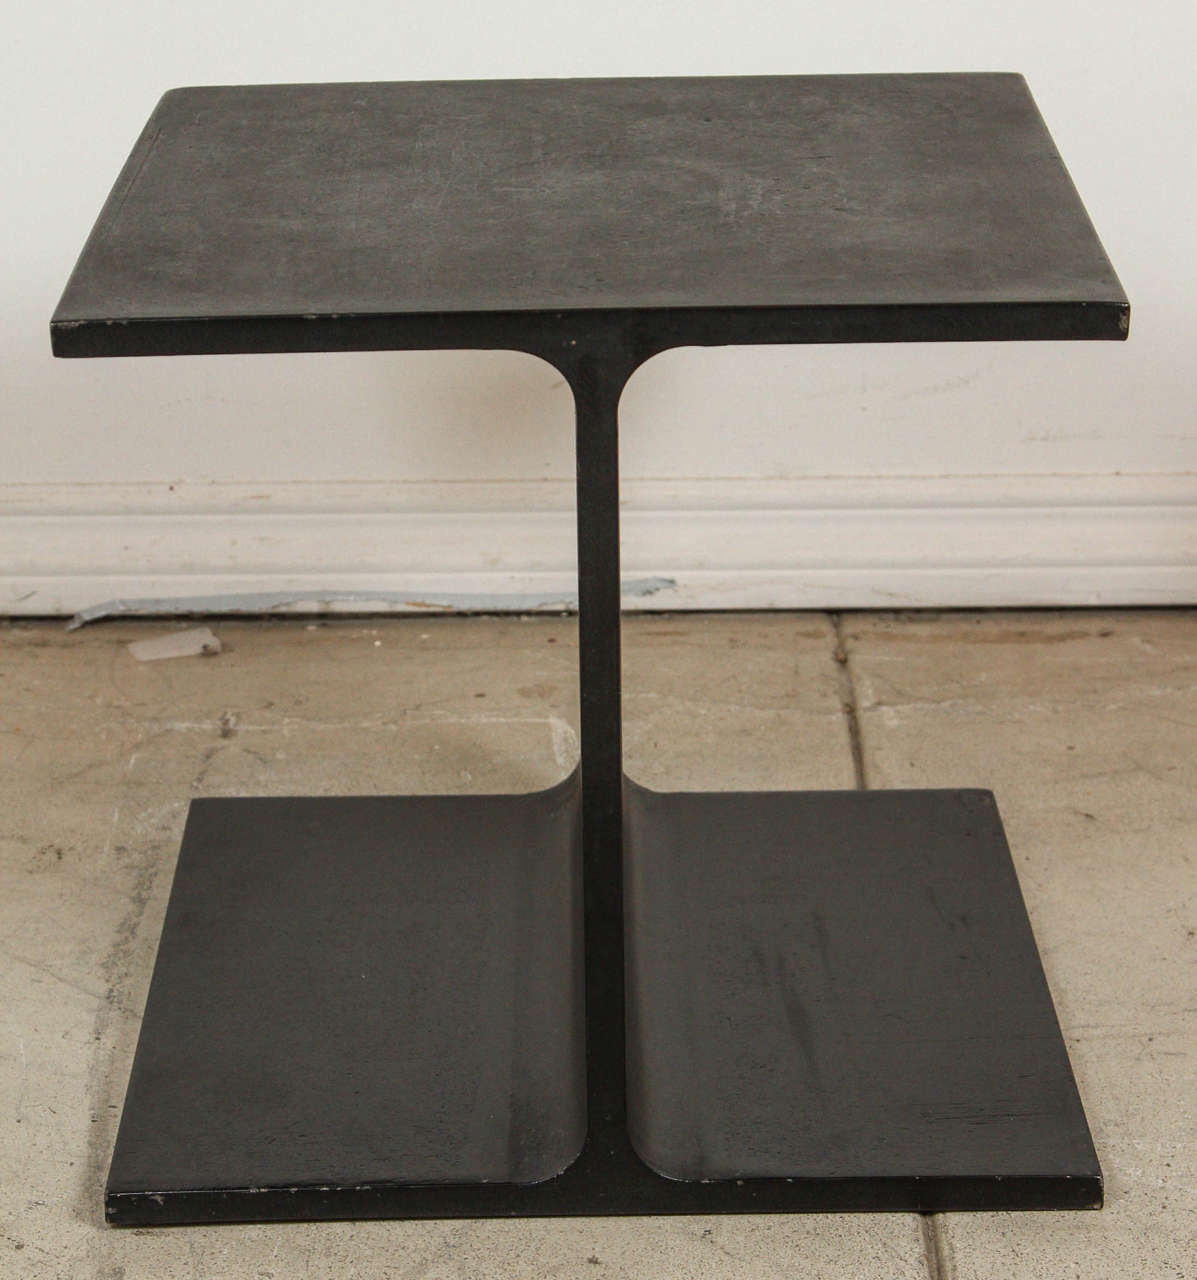 Pair of painted steel I-beam tables by Ward Bennett for Brickell, circa 1985.